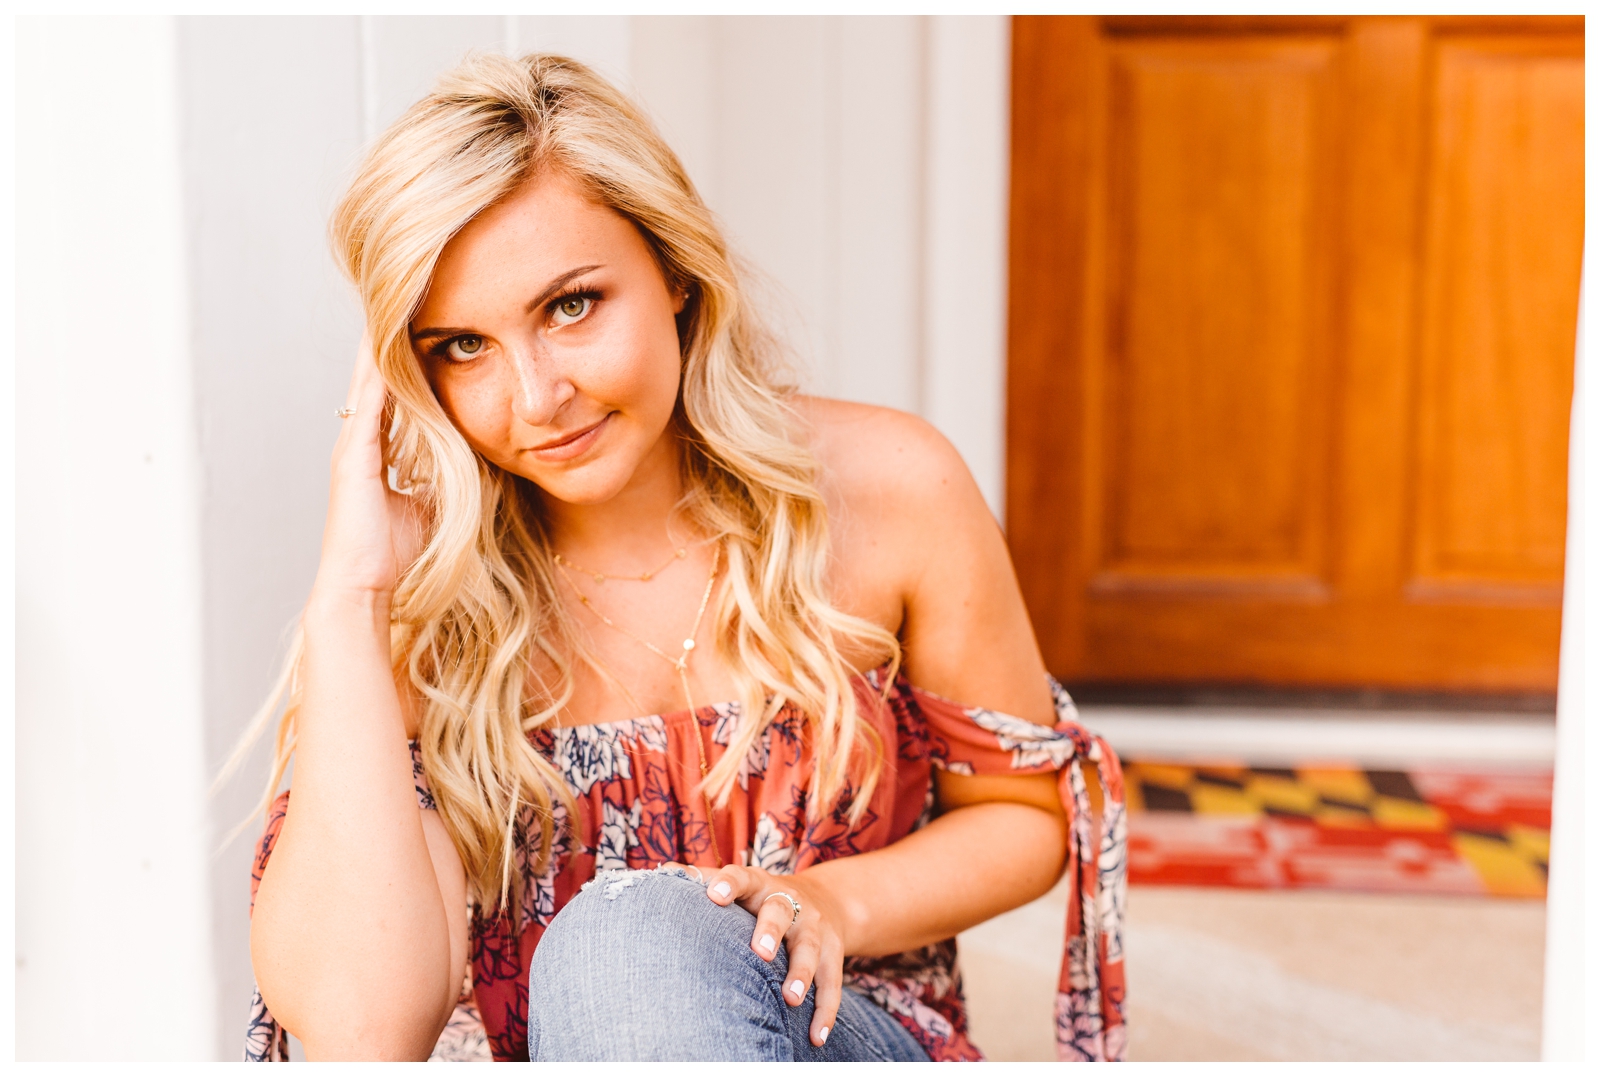 Bright Downtown Easton Maryland Senior Session - Brooke Michelle Photography